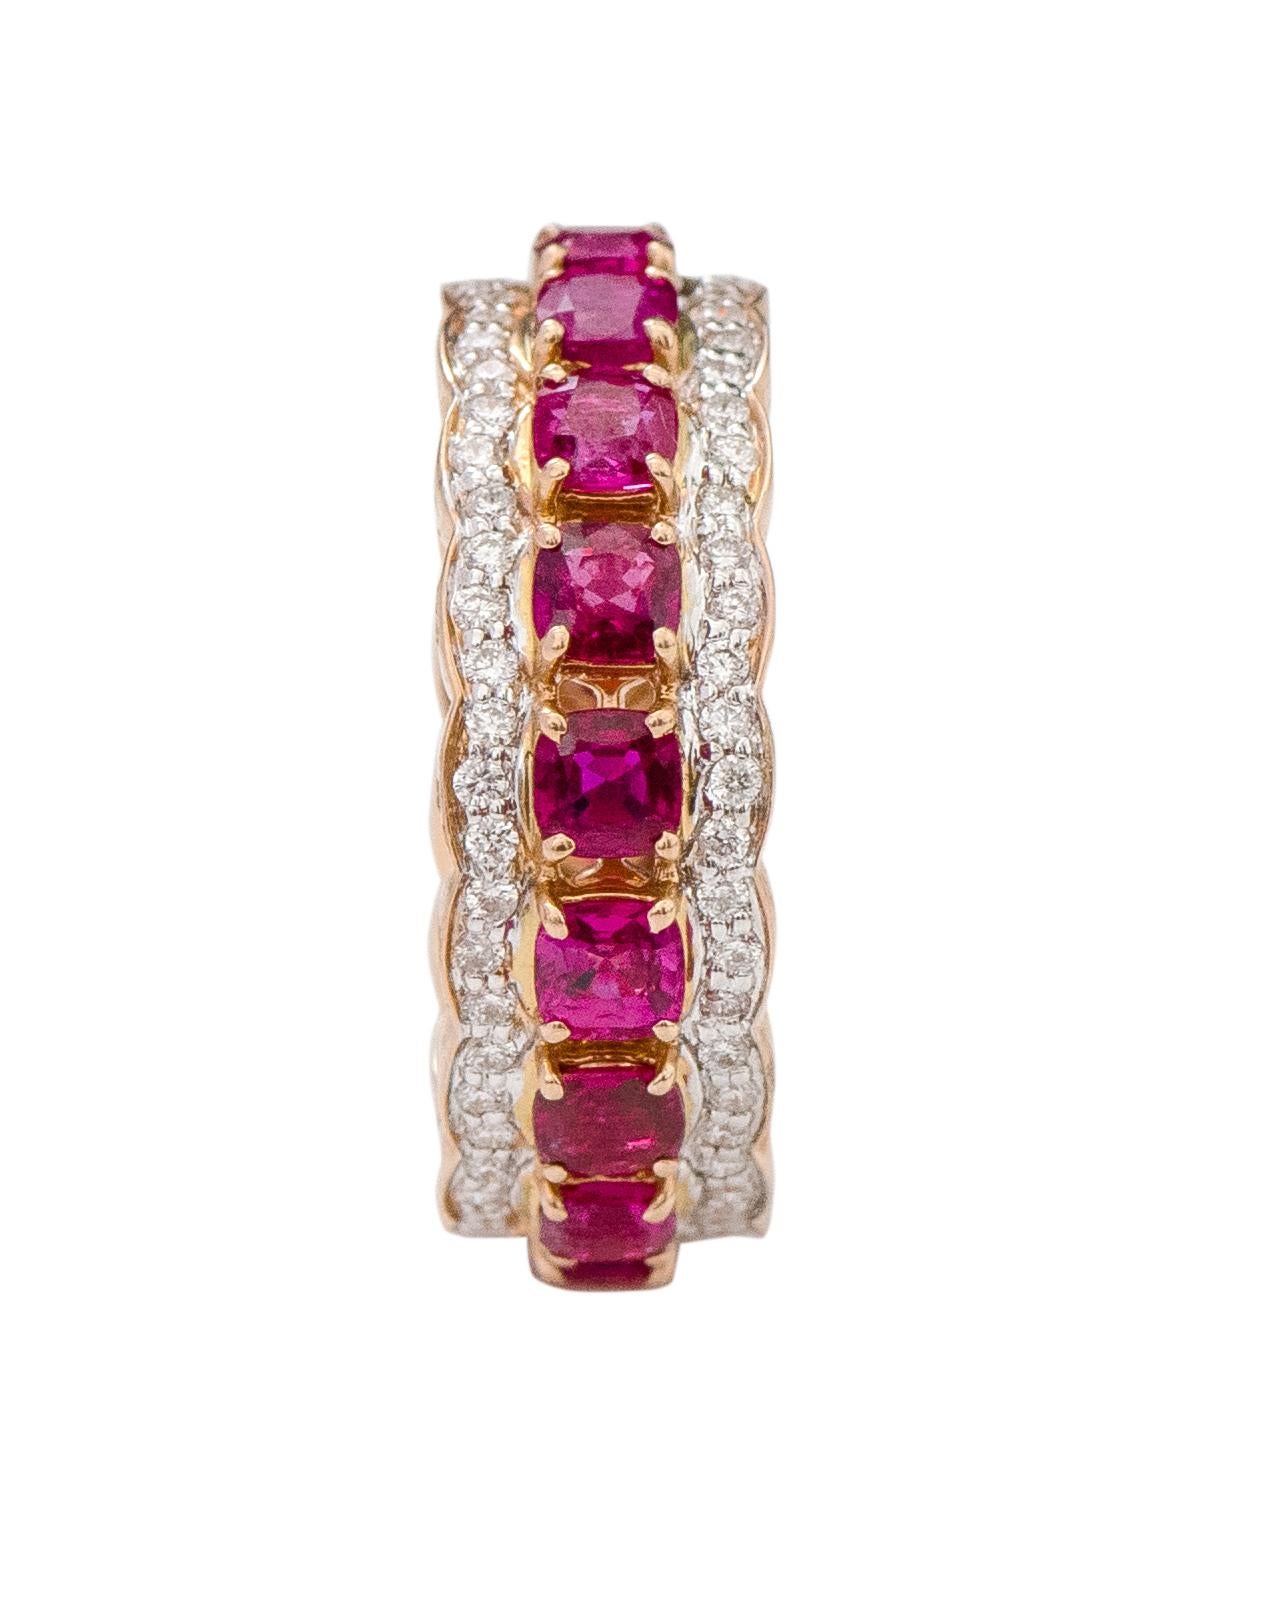 Women's 18 Karat Rose Gold 2.23 Carat Cushion-Cut Ruby and Diamond Eternity Band Ring For Sale